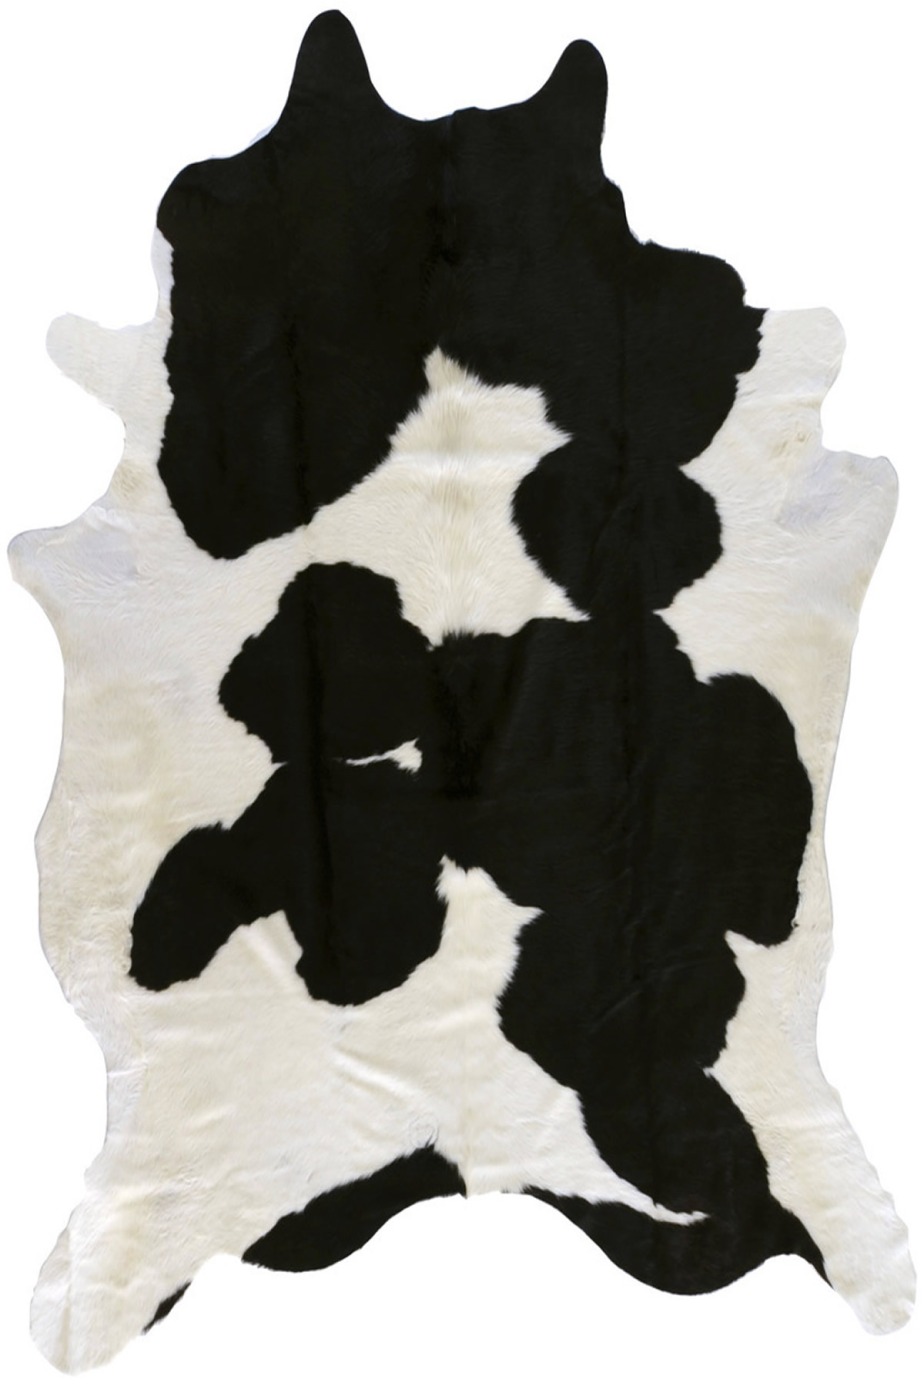 Decoration Interior Faux Cowhide Bathroom Rugs With Small Faux Fur Cowhide Rug Black White Fake Cow Hide Rug Faux Cowhide Rug With Beauty And Flexibility Materials Design